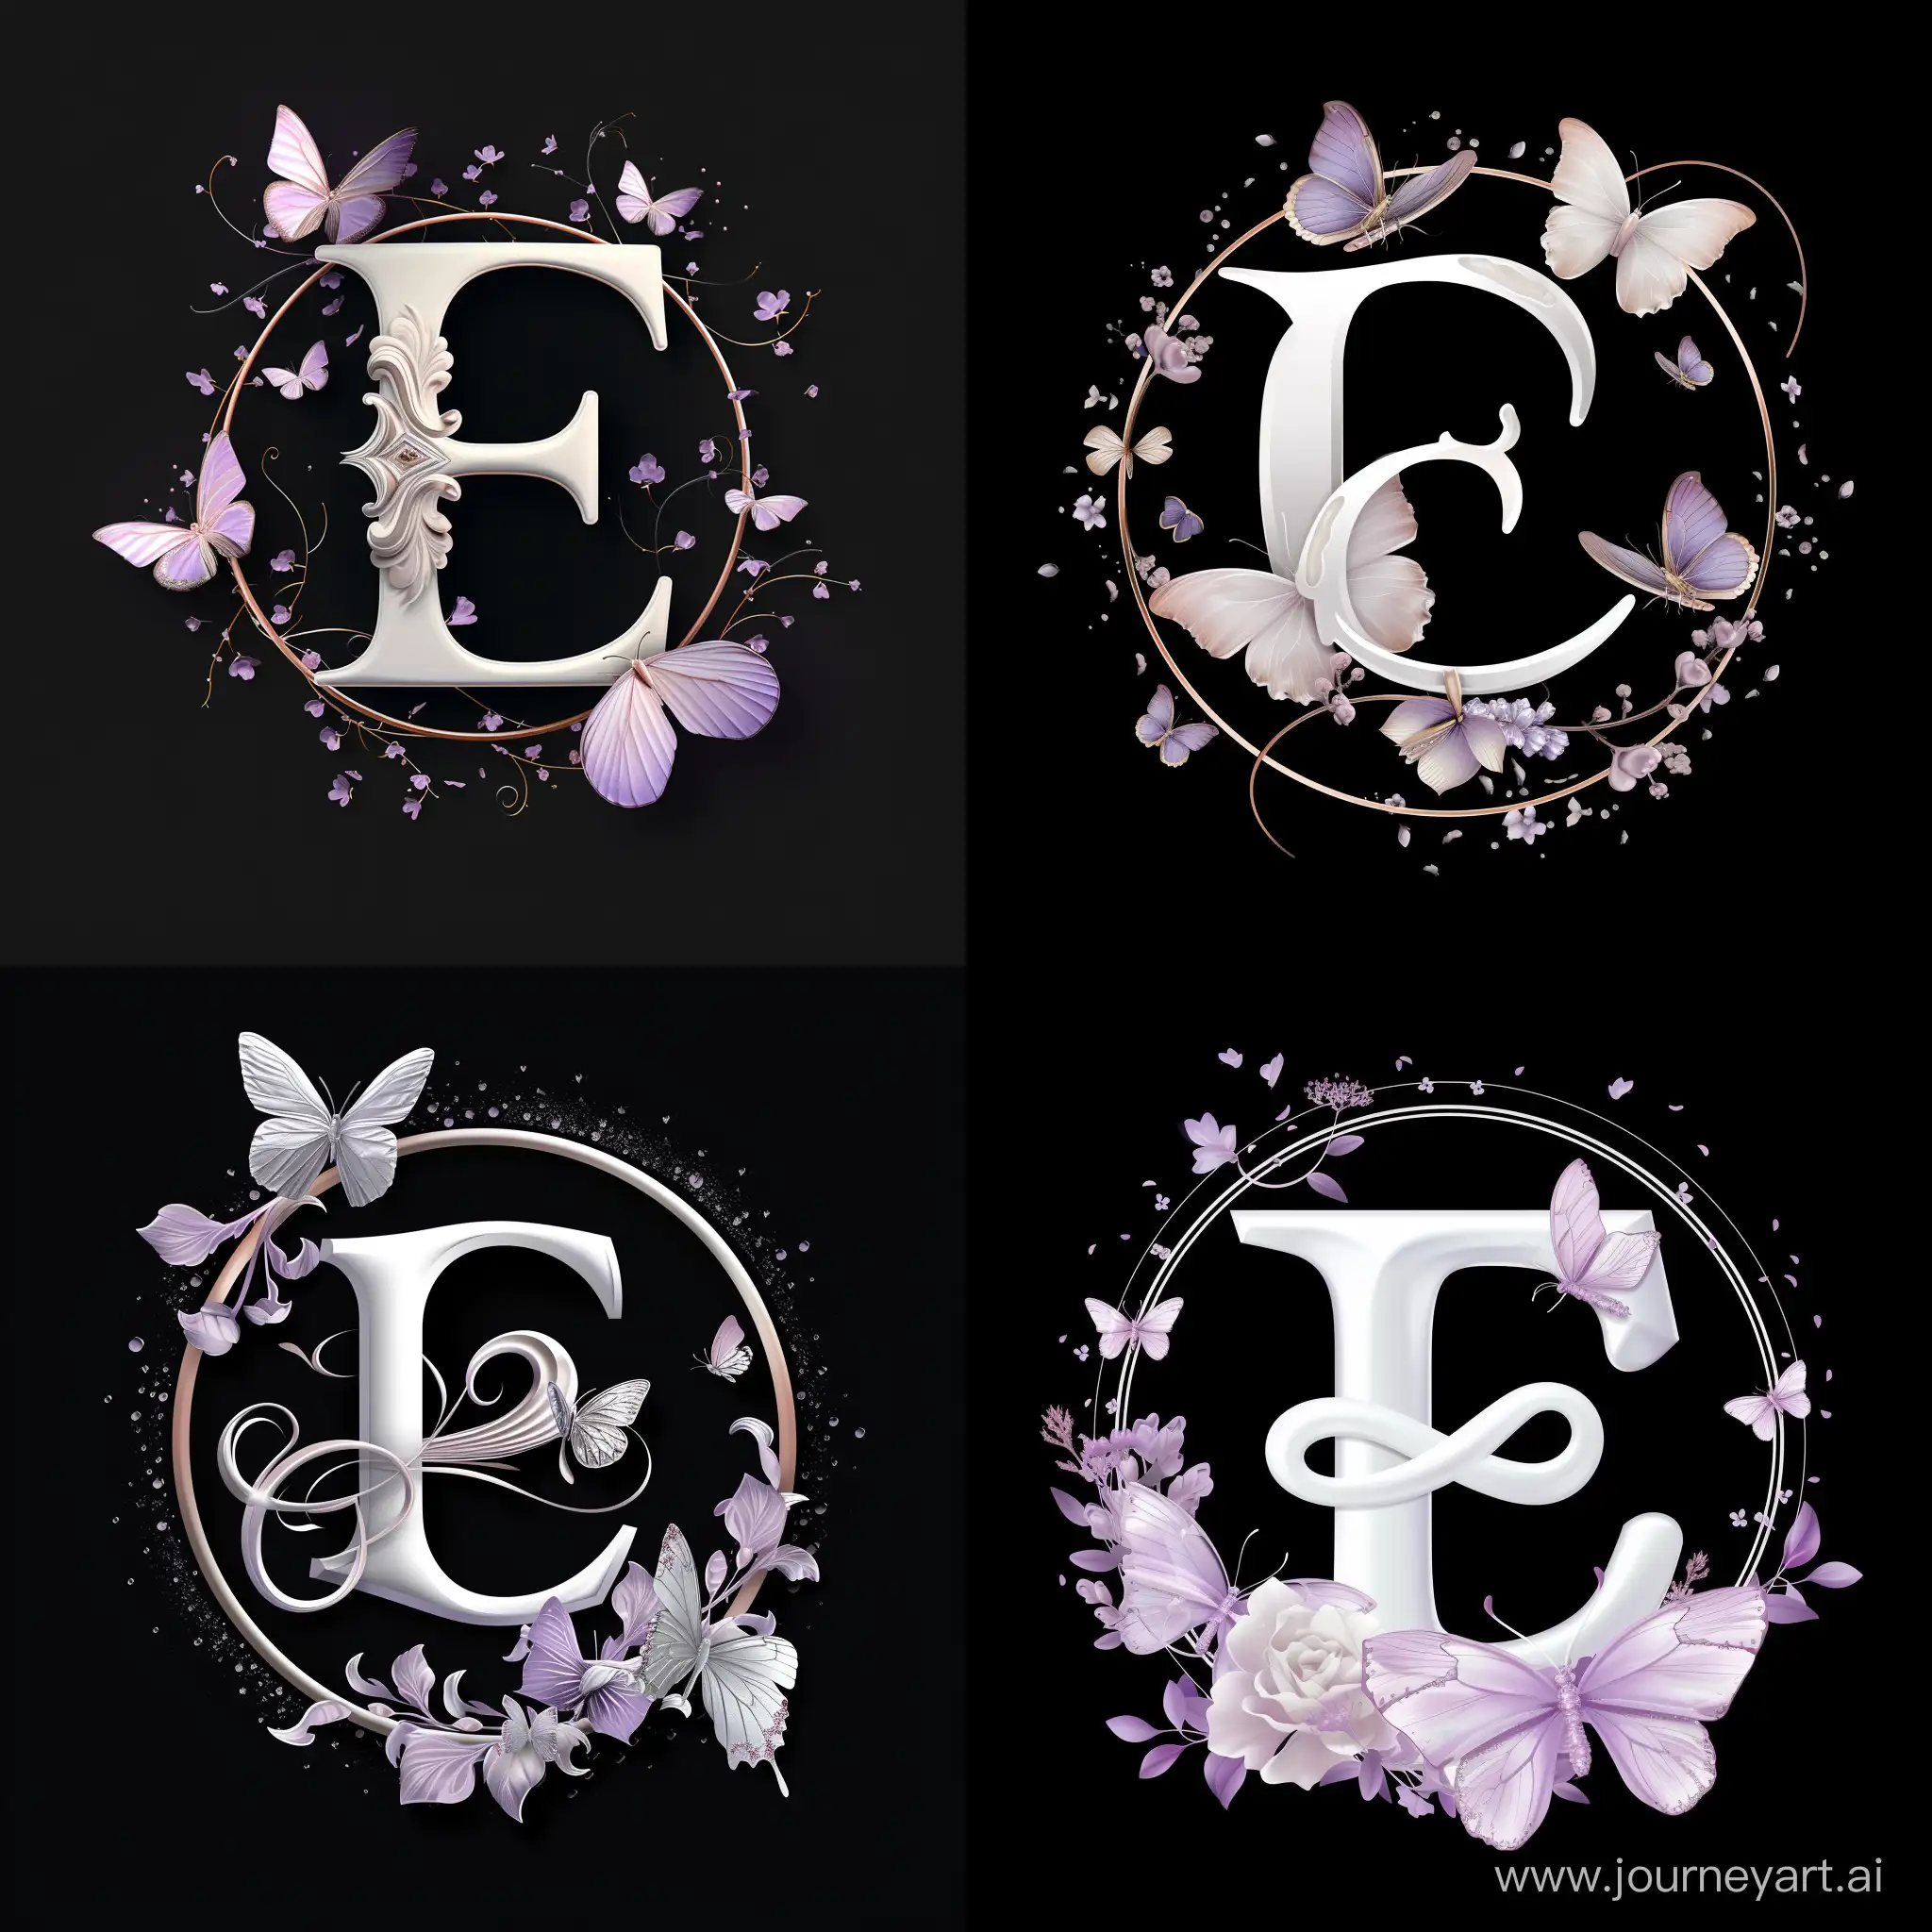 Elegant-White-Letter-E-Logo-with-Lilac-Butterflies-for-High-Prestige-Beauty-Business